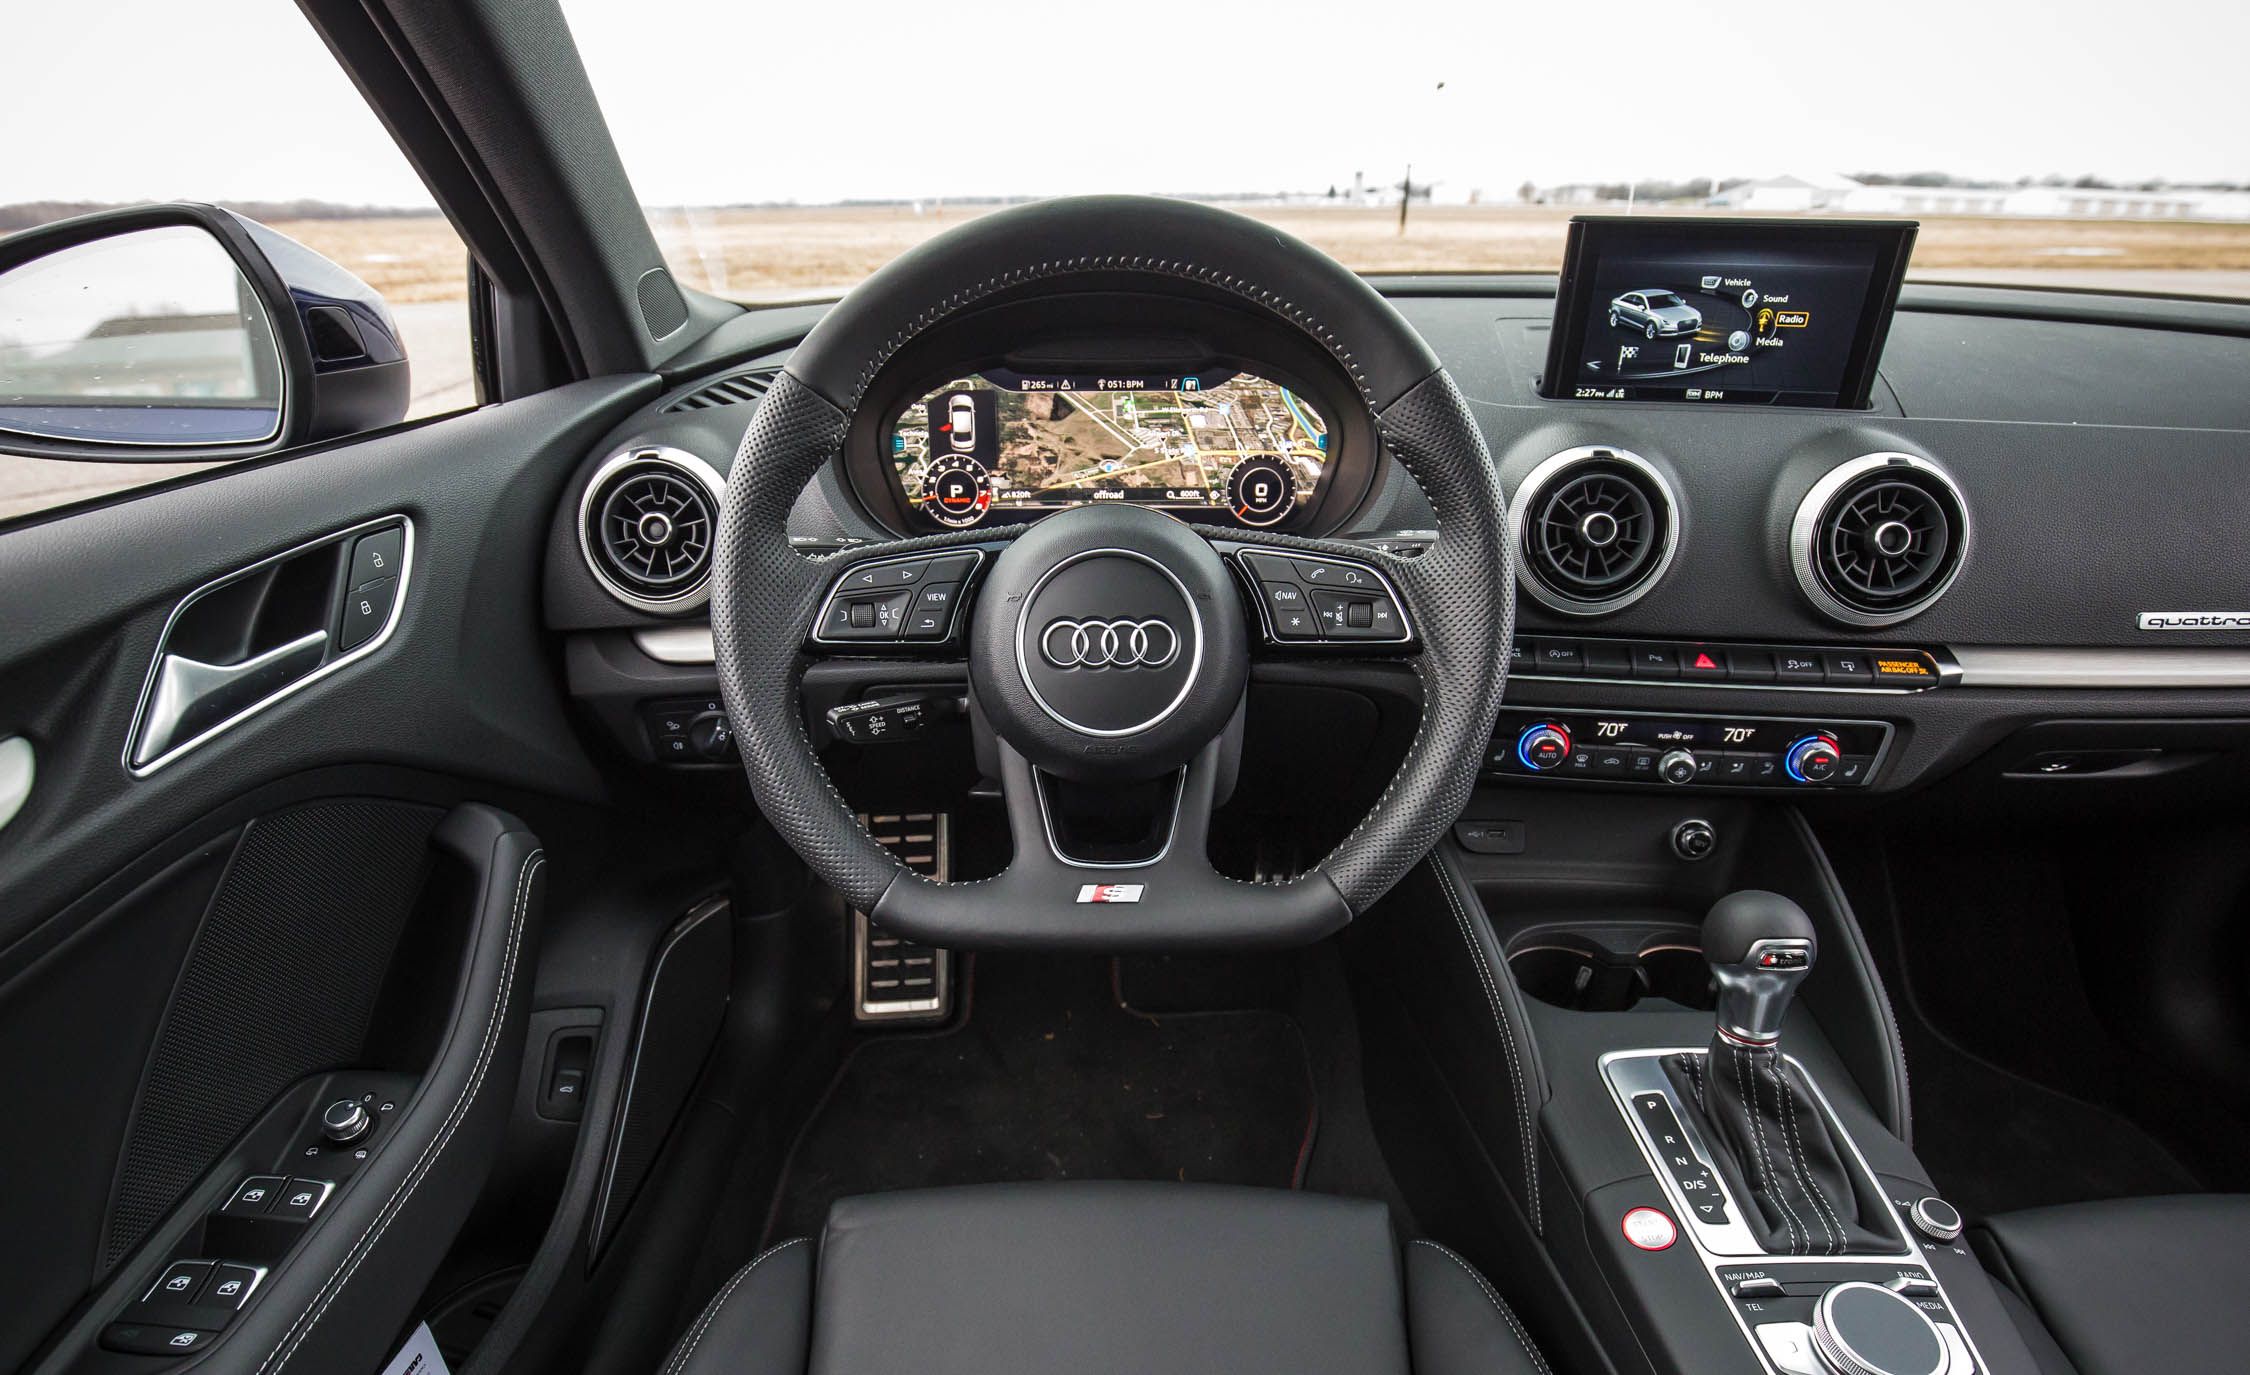 2017 Audi S3 Interior Drive Cockpit And Dash (View 37 of 50)